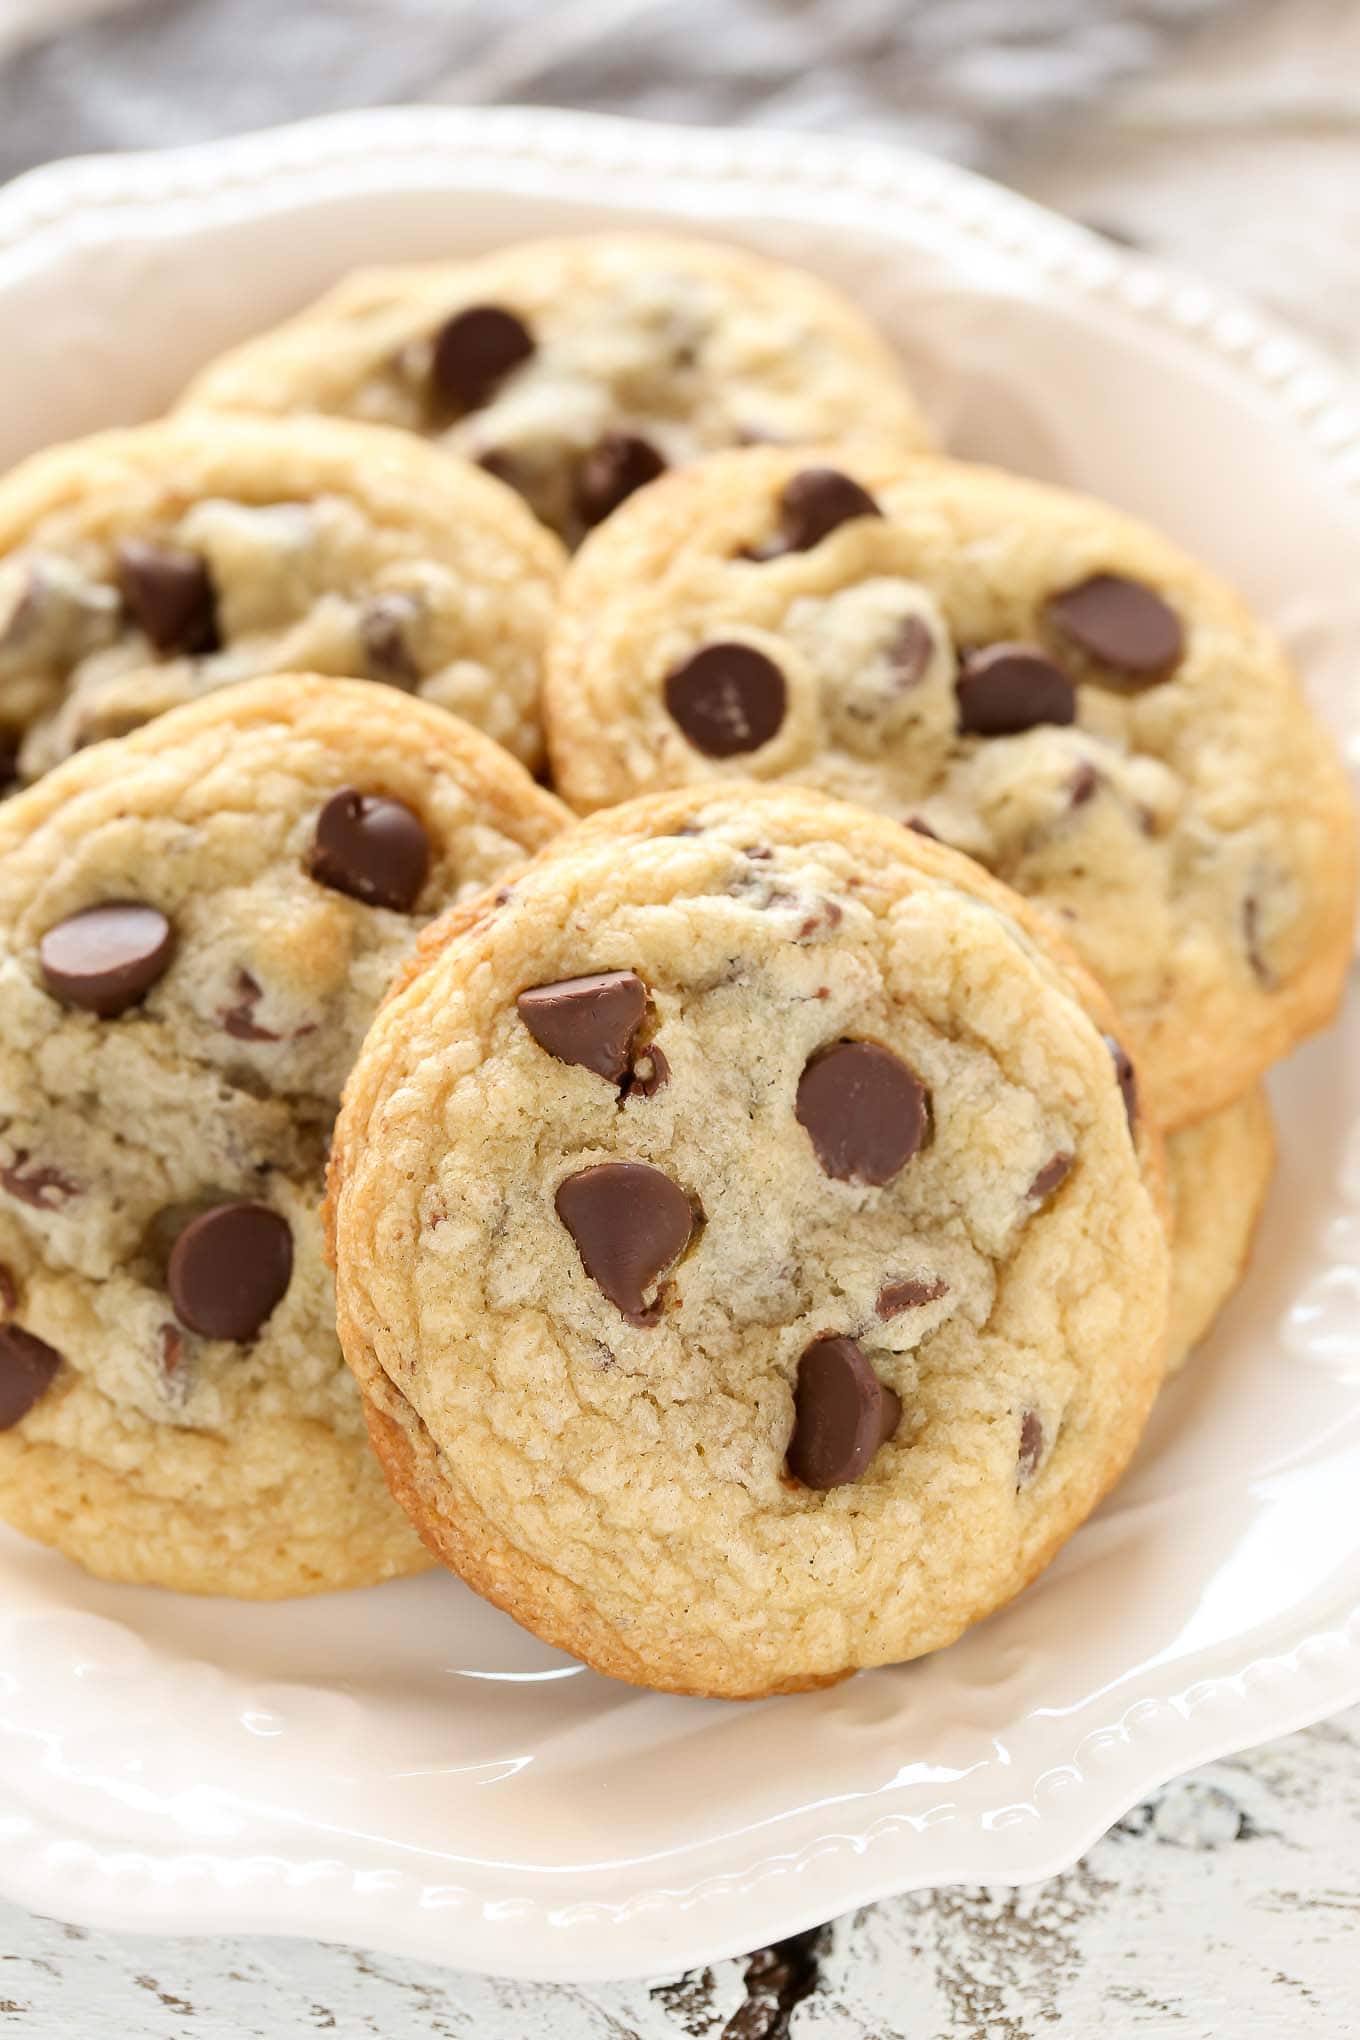 Soft and Chewy Chocolate Chip Cookies Recipe